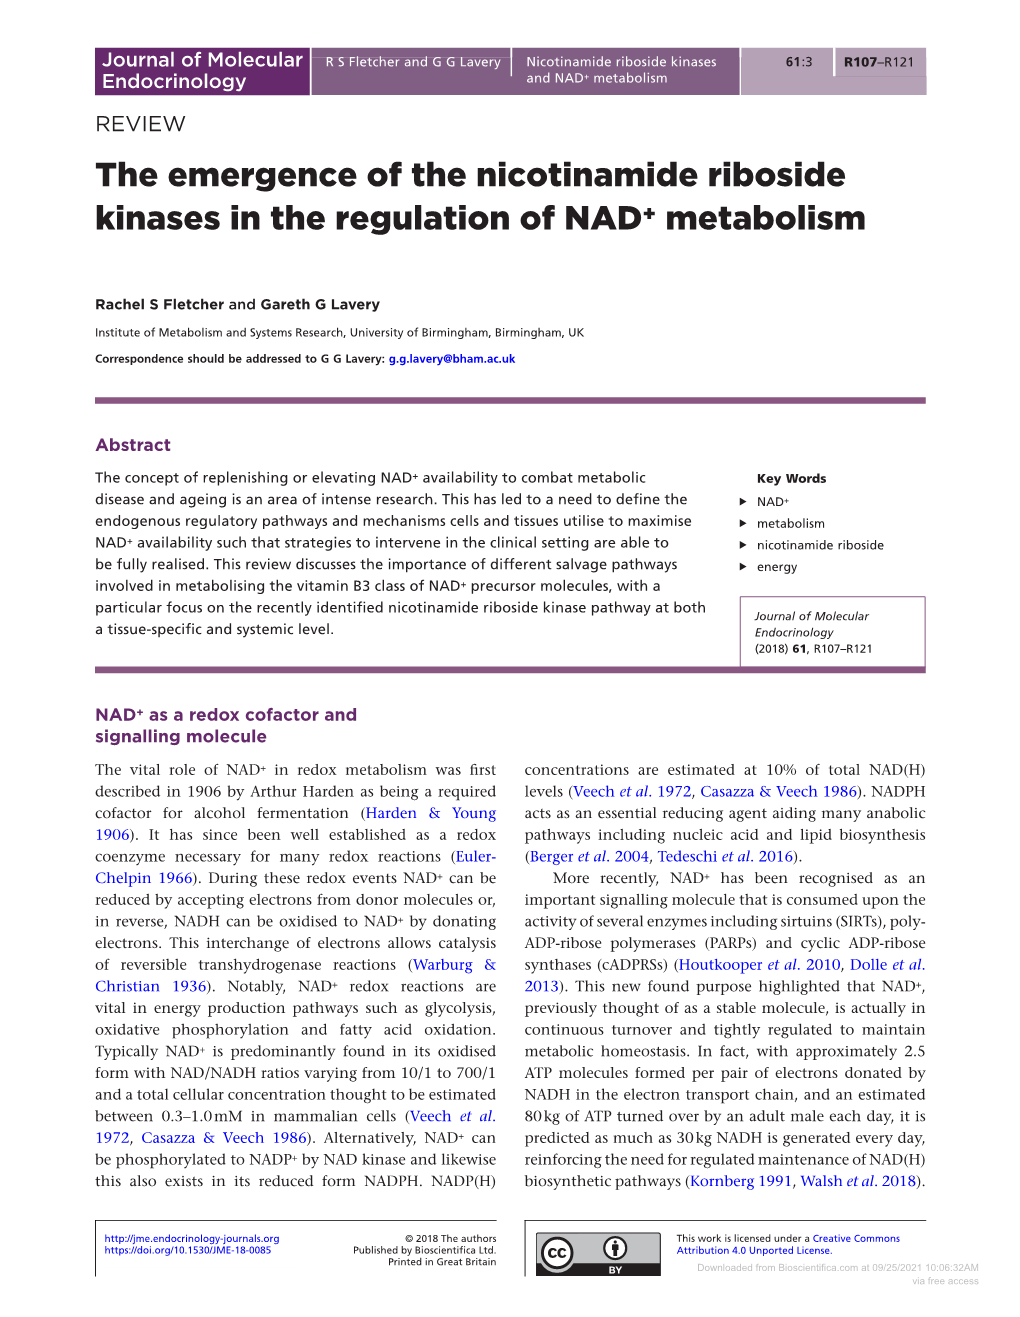 The Emergence of the Nicotinamide Riboside Kinases in the Regulation of NAD+ Metabolism